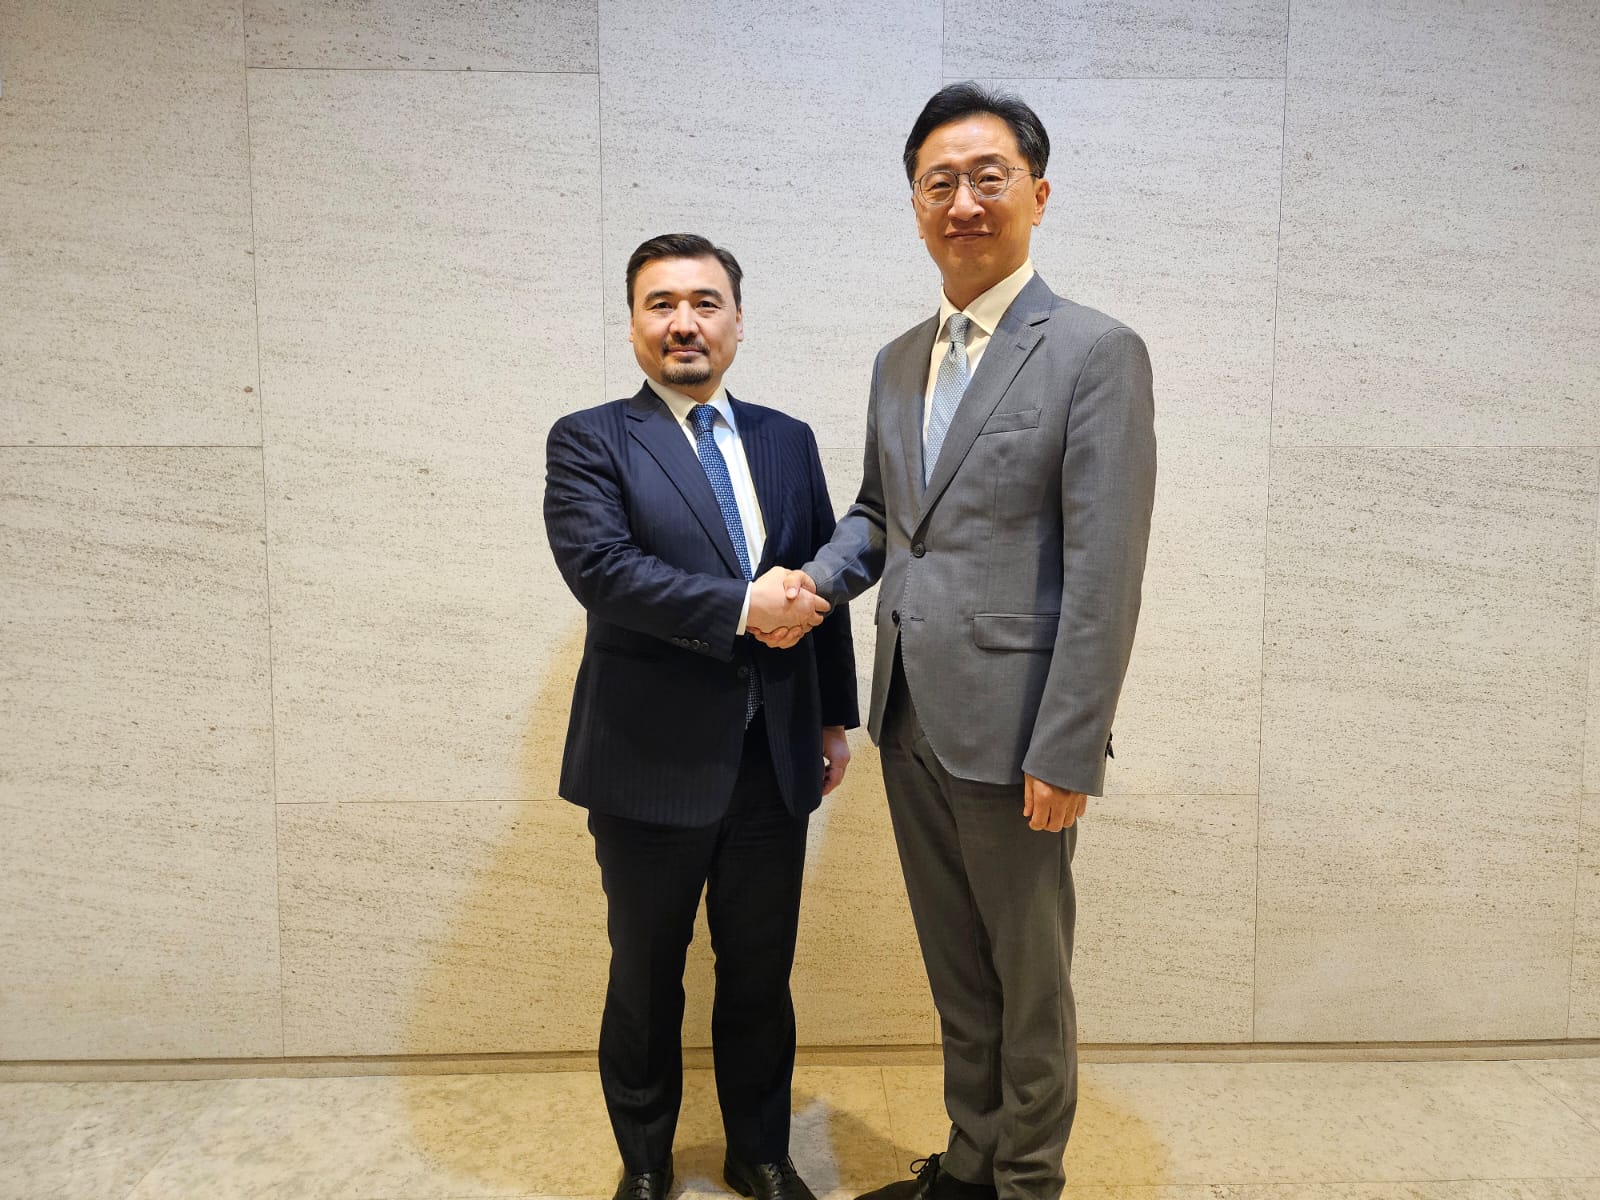 The Ambassador of Kazakhstan Discuss the Schedule of Upcoming Events with the Deputy Minister of Foreign Affairs of Korea